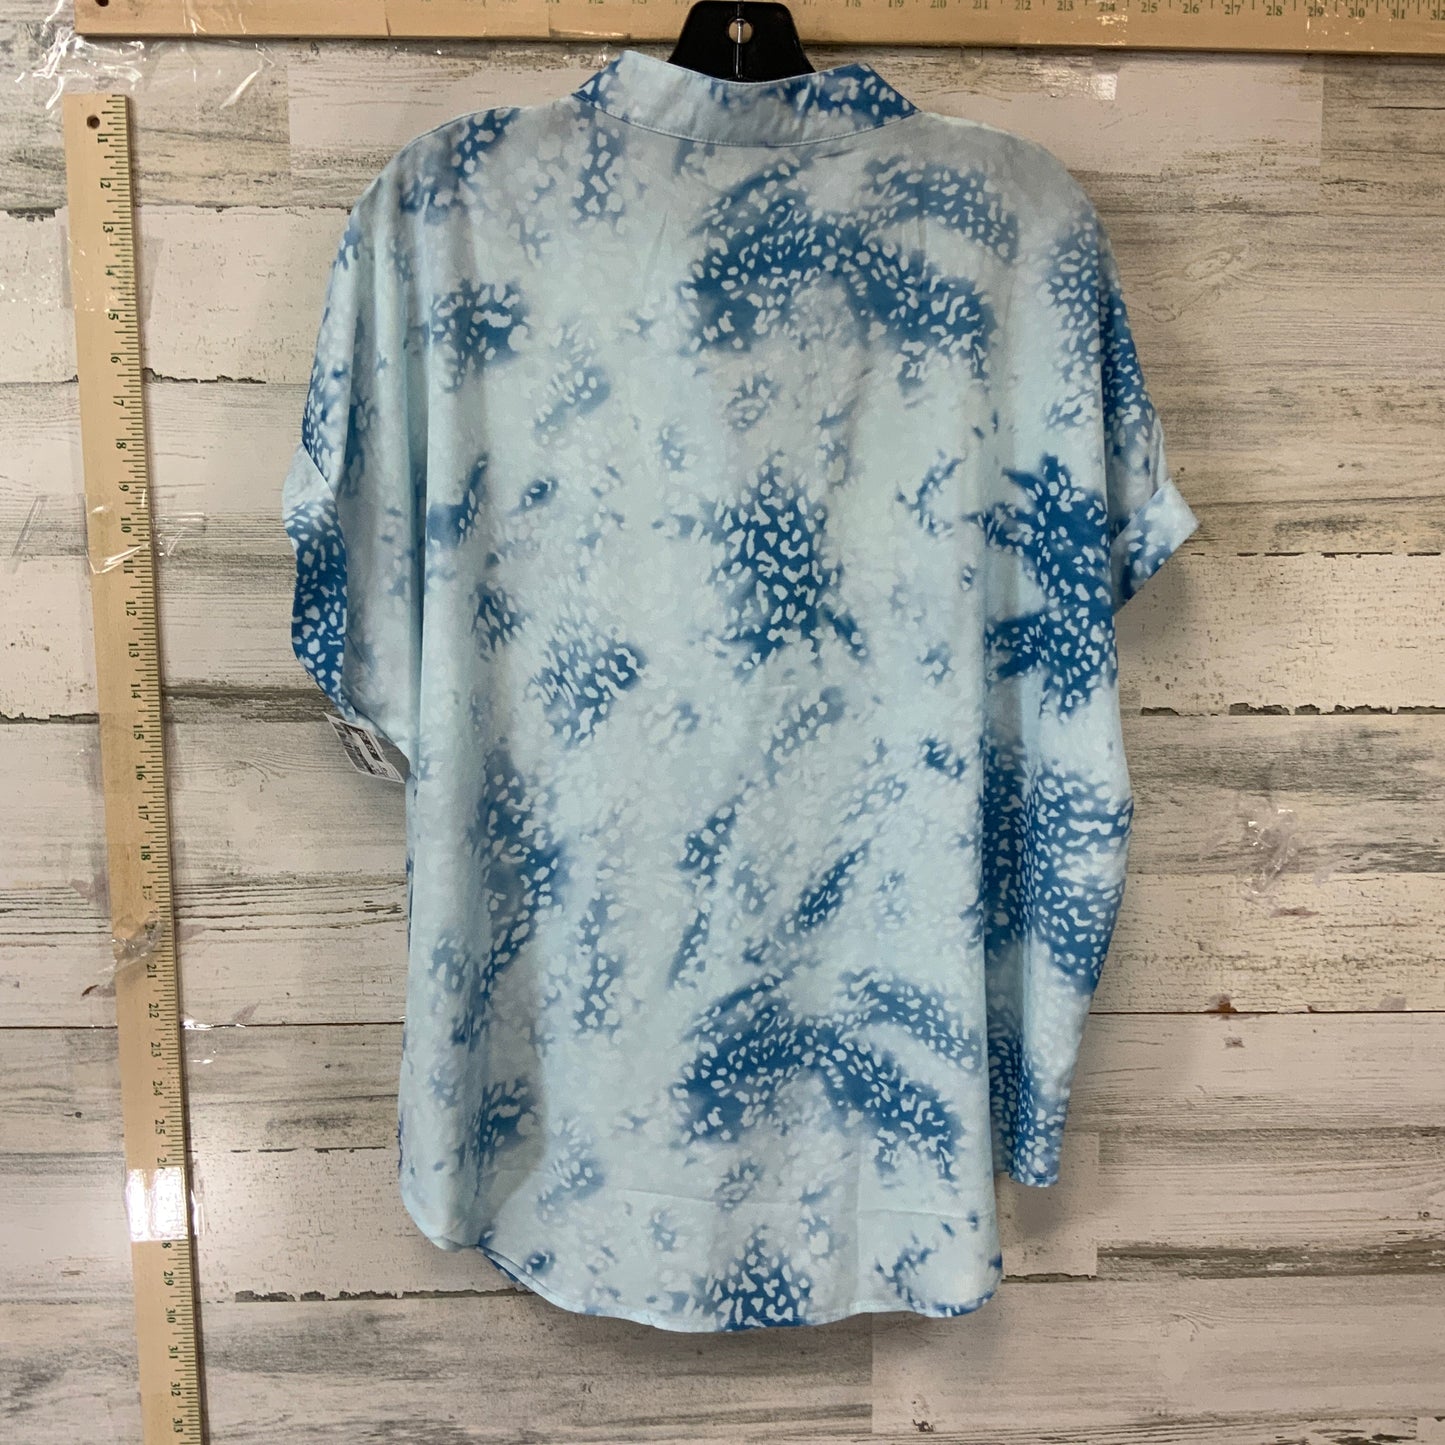 Blue Top Short Sleeve Clothes Mentor, Size 2x